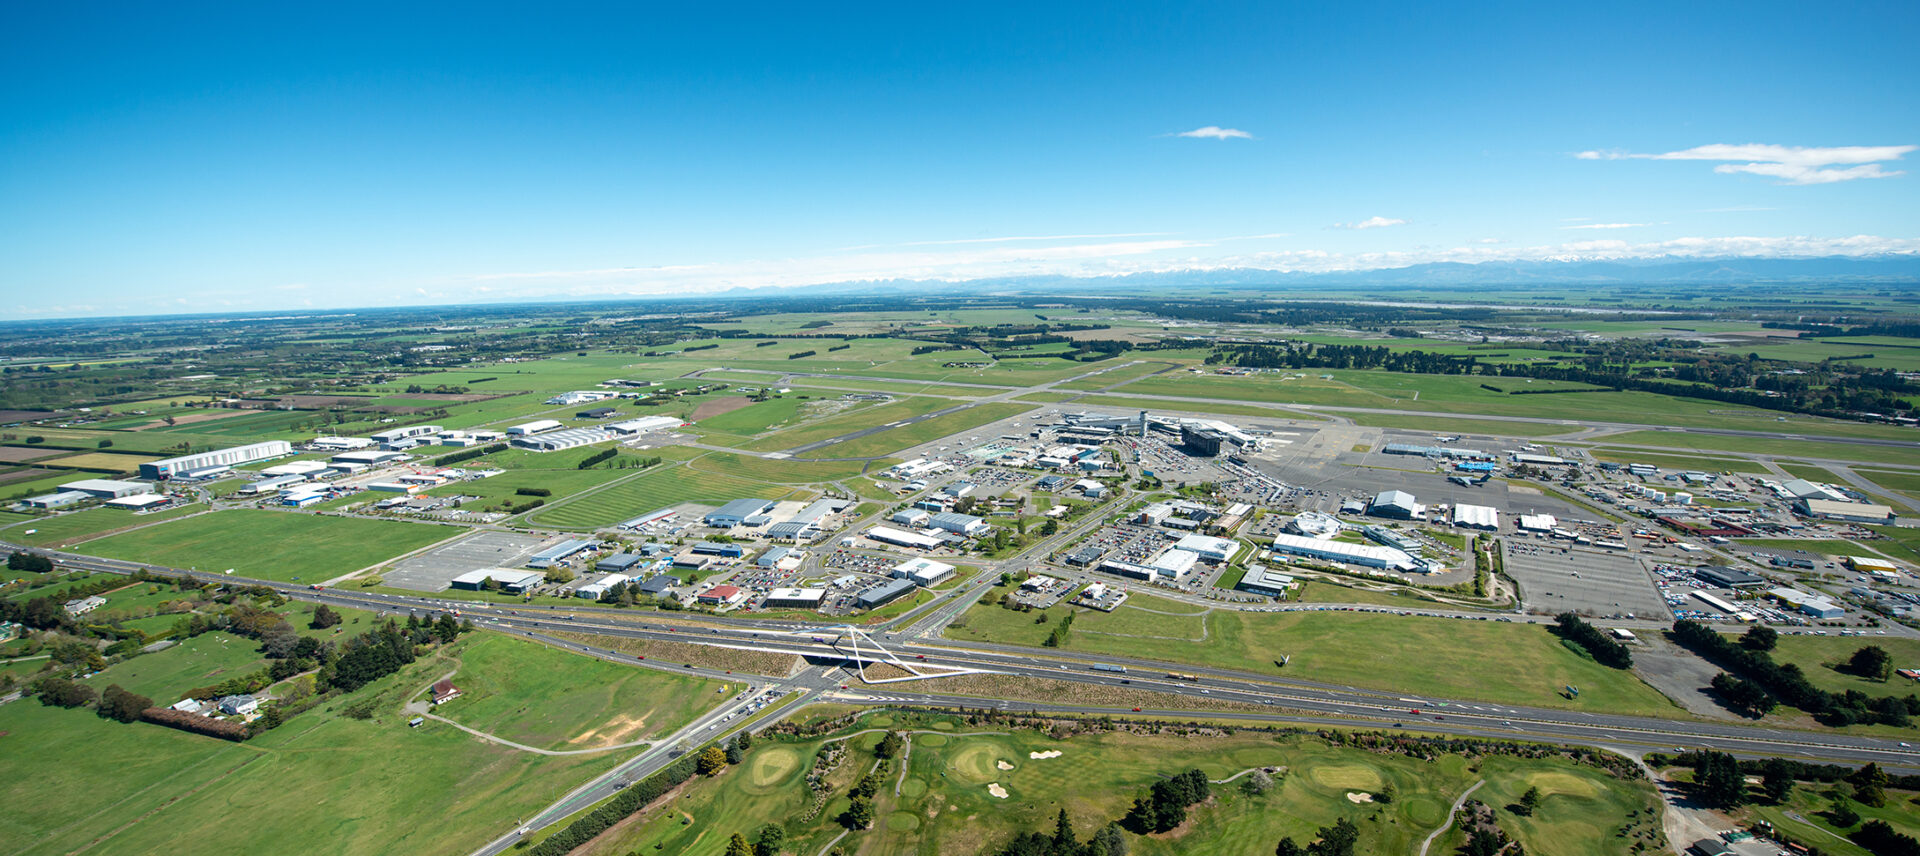 About Chch Airport